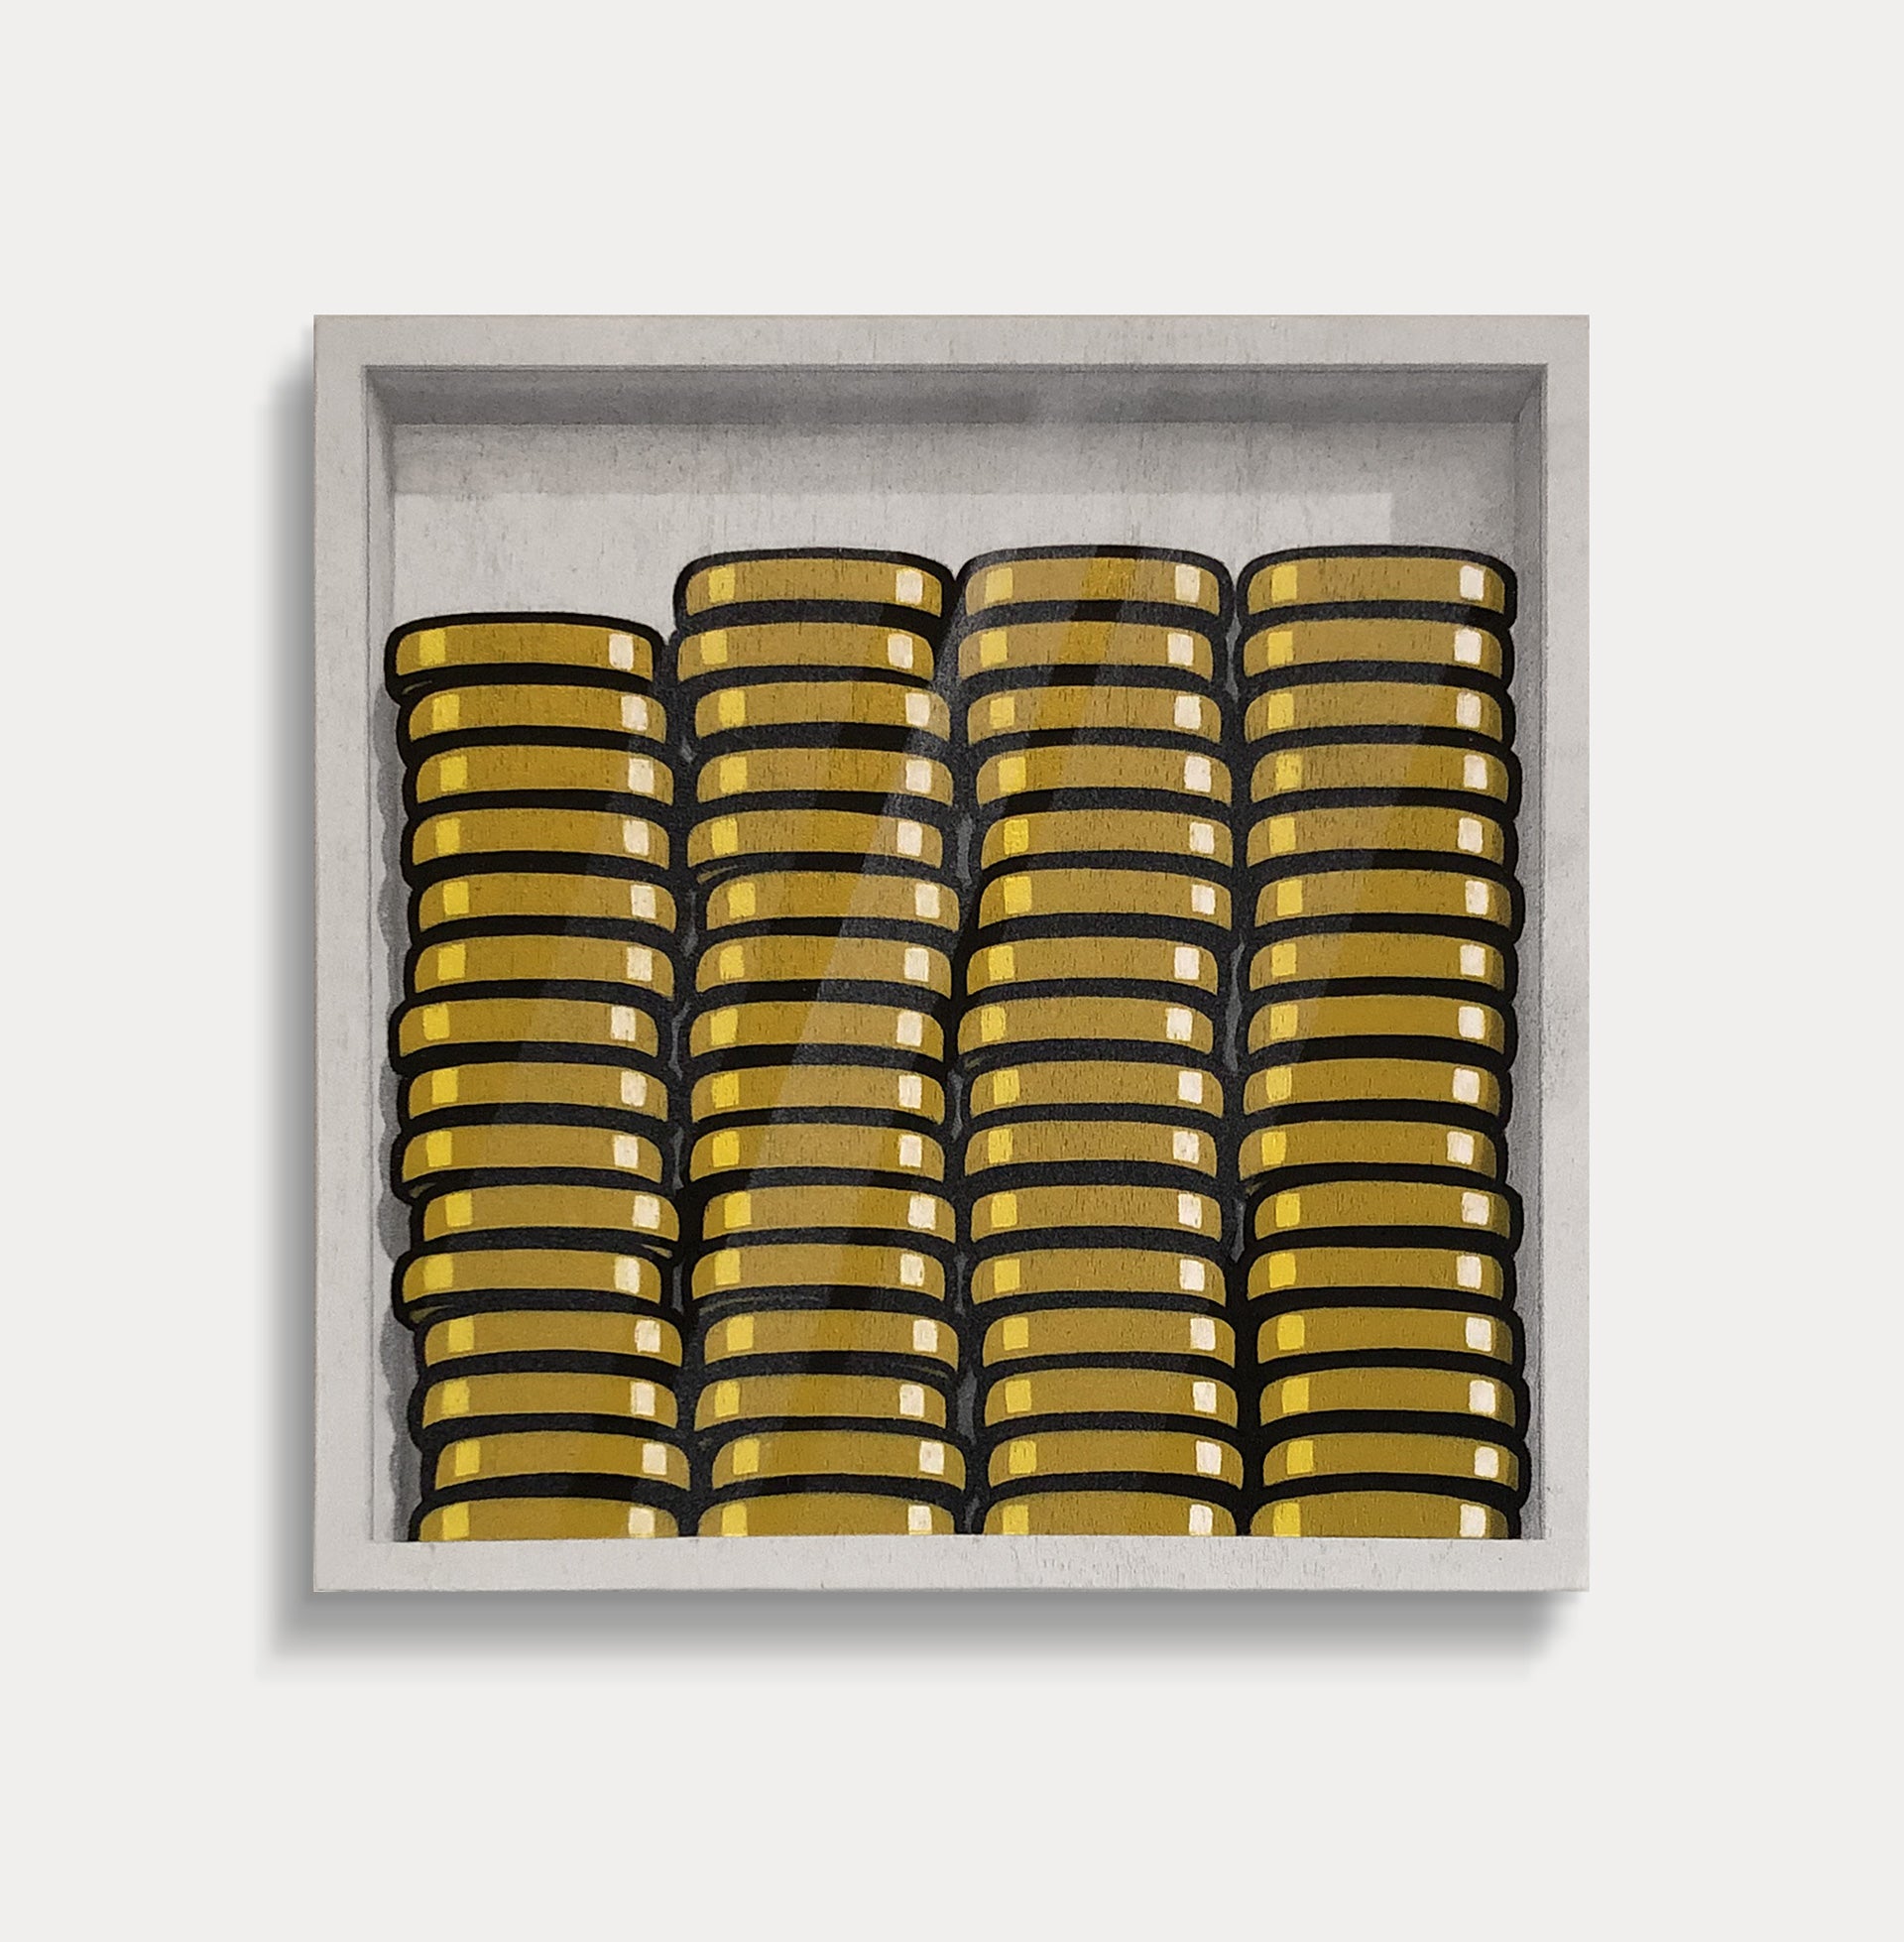 "63 Gold Coins ($3780)" by E.LEE